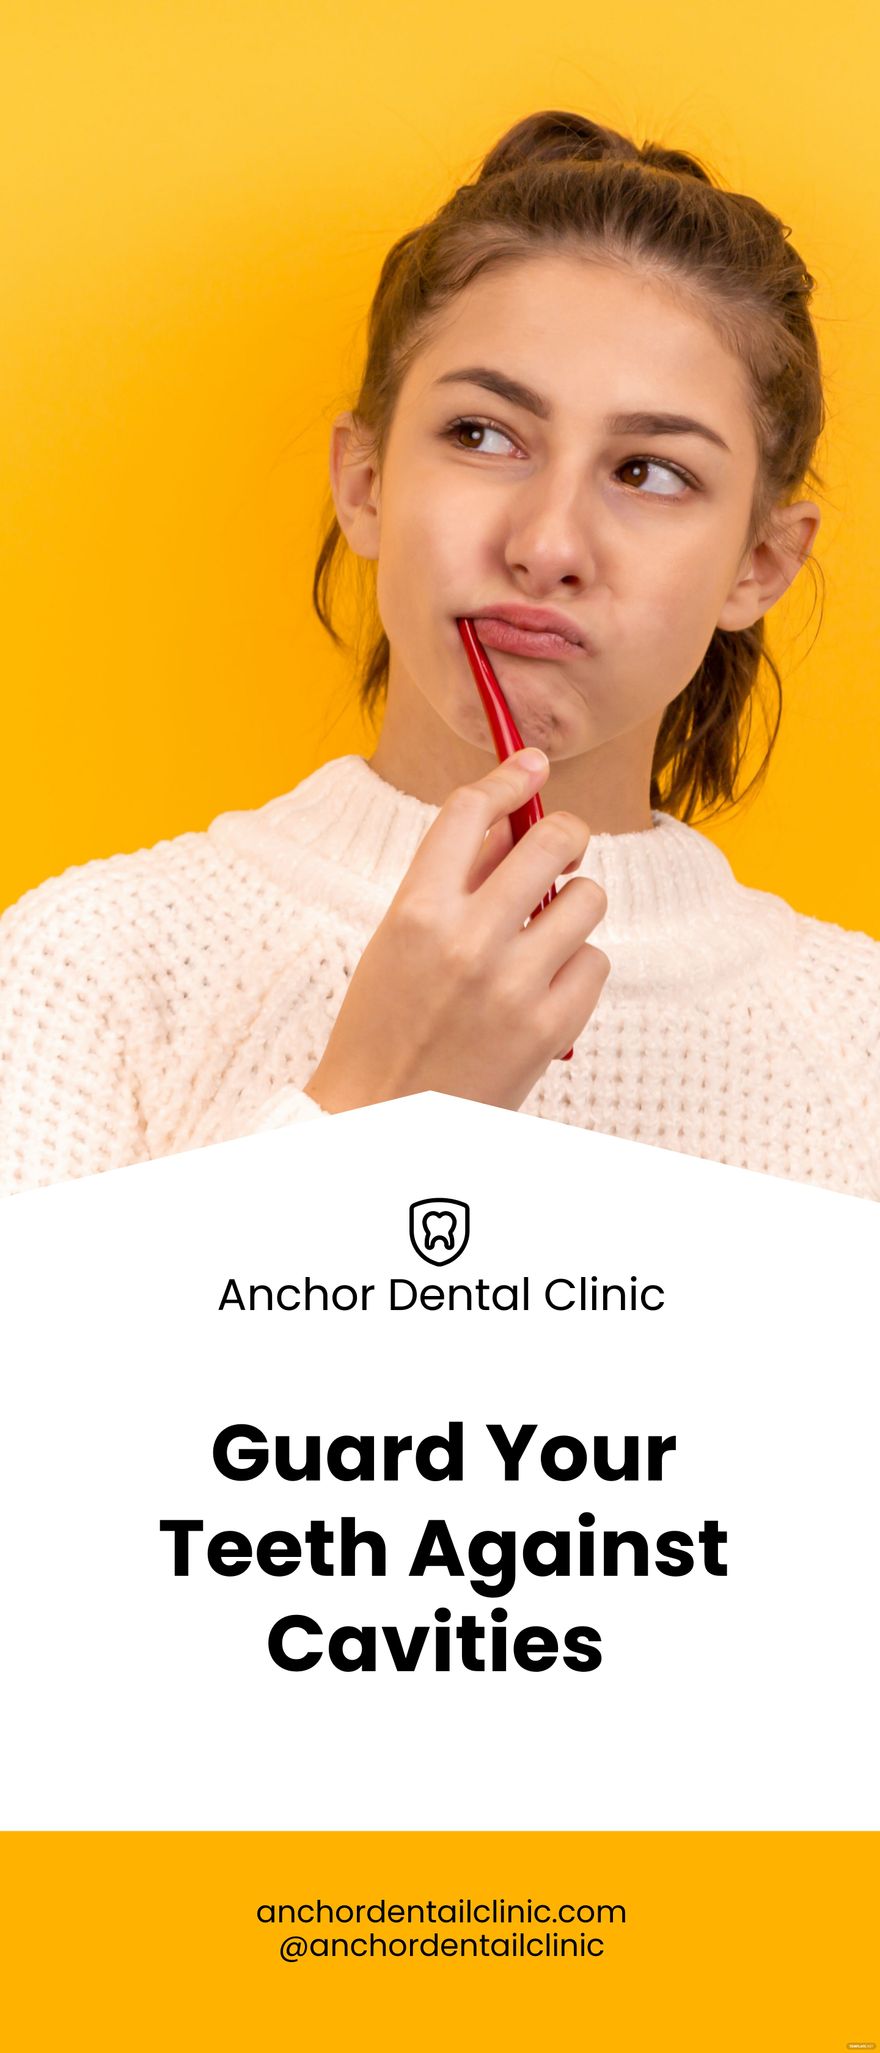 Dental Guard Medical Roll Up Banner Template in Word, Google Docs, Apple Pages, Publisher